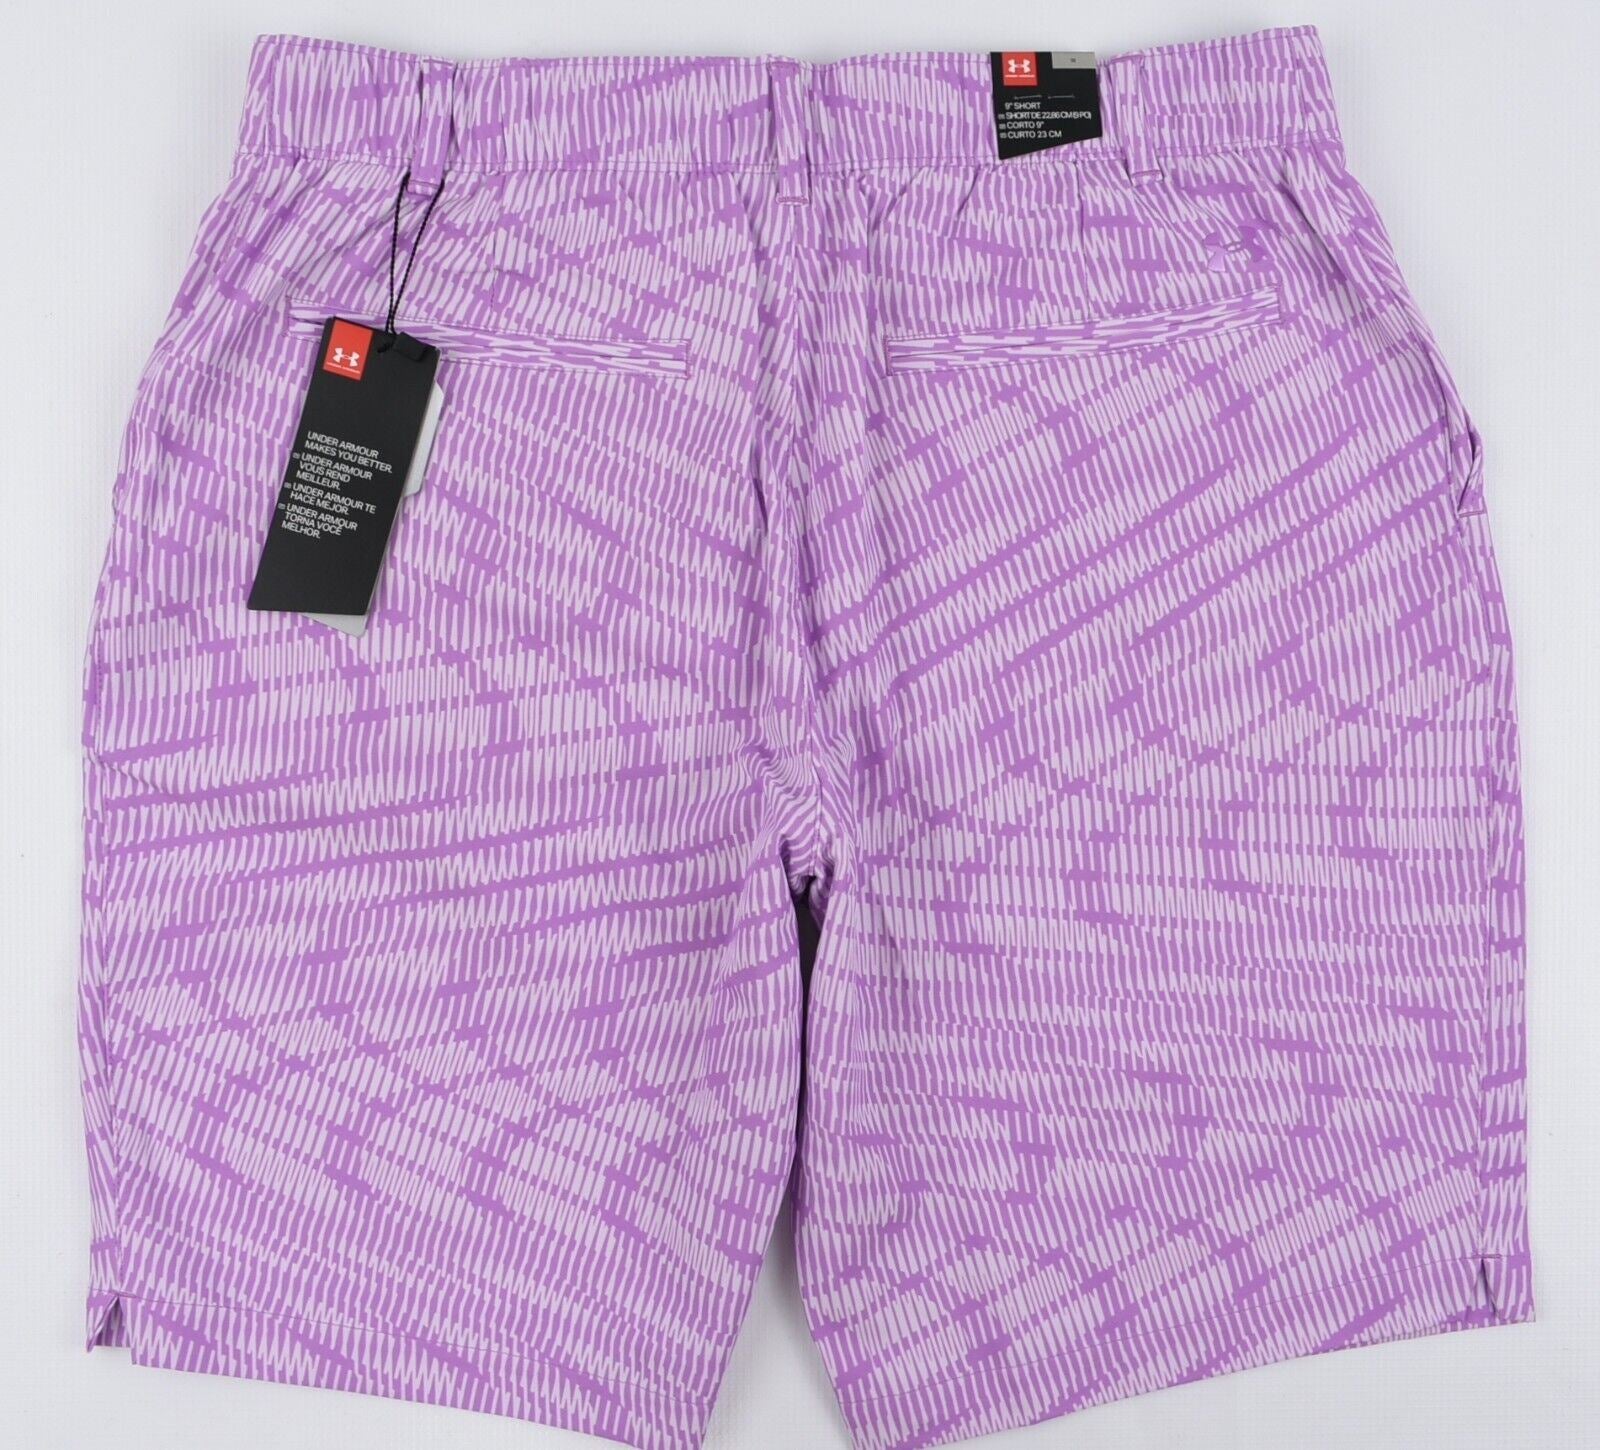 UNDER ARMOUR GOLF Women's 9" Shorts, Purple/Printed, size S (UK 10)